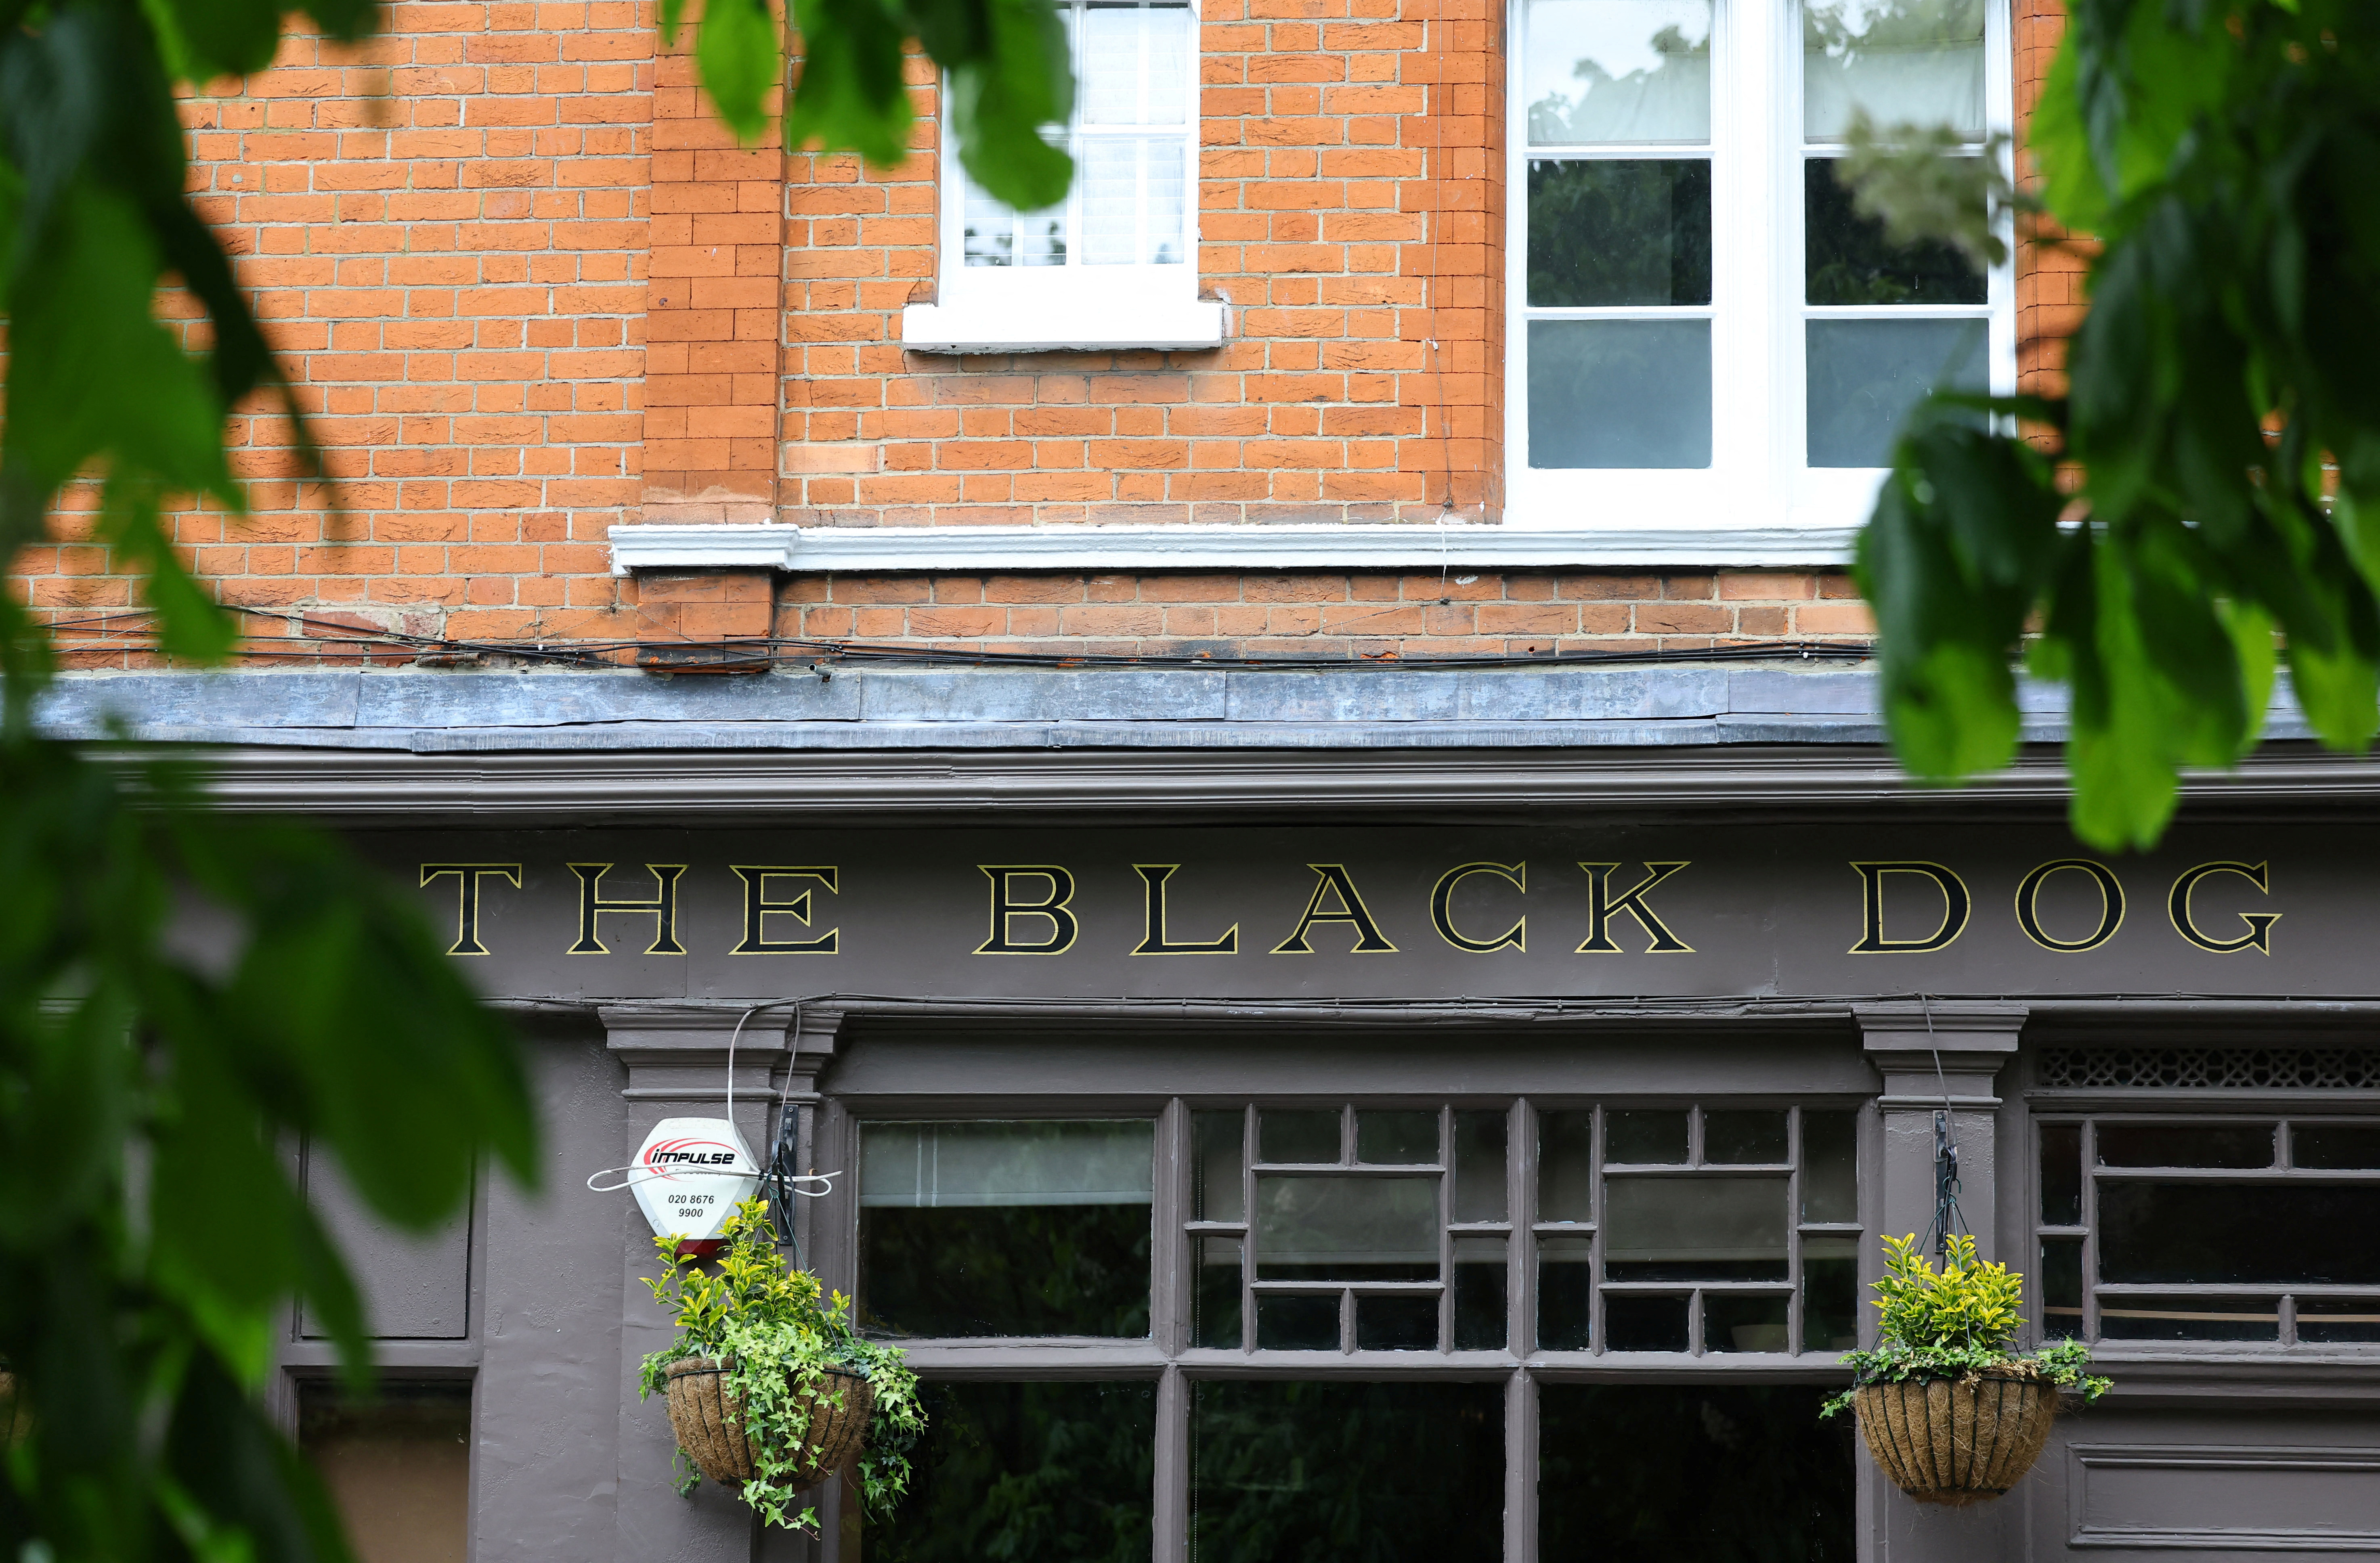 The Black Dog pub, claimed to have been referenced in lyrics in the song The Black Dog by Taylor Swift, in London